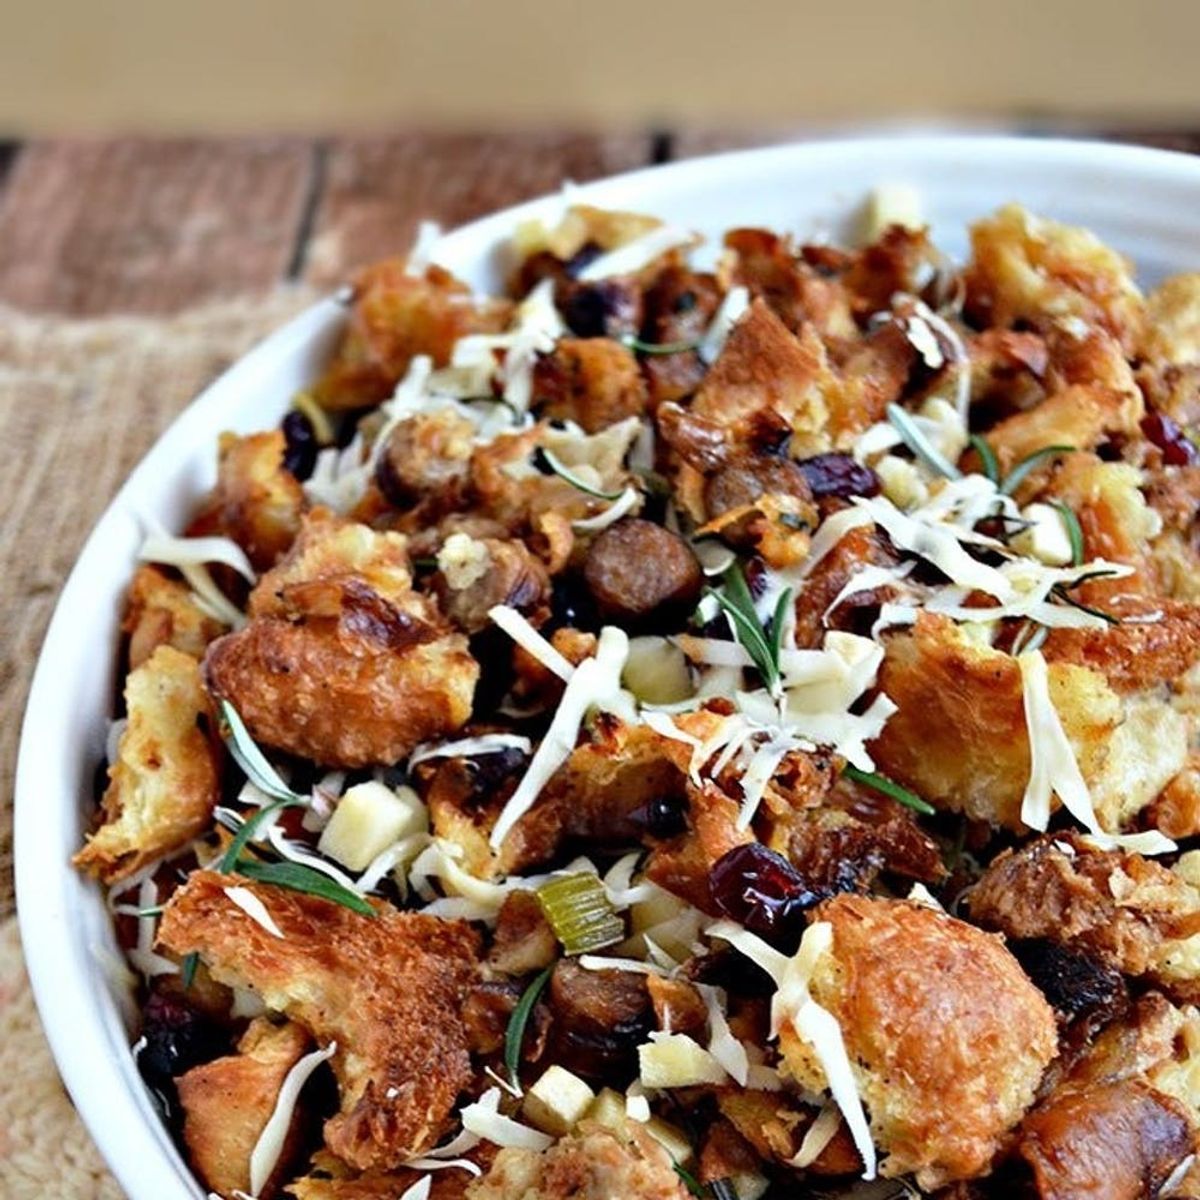 20 Scrumptious Stuffing Recipes That Go Beyond the Box